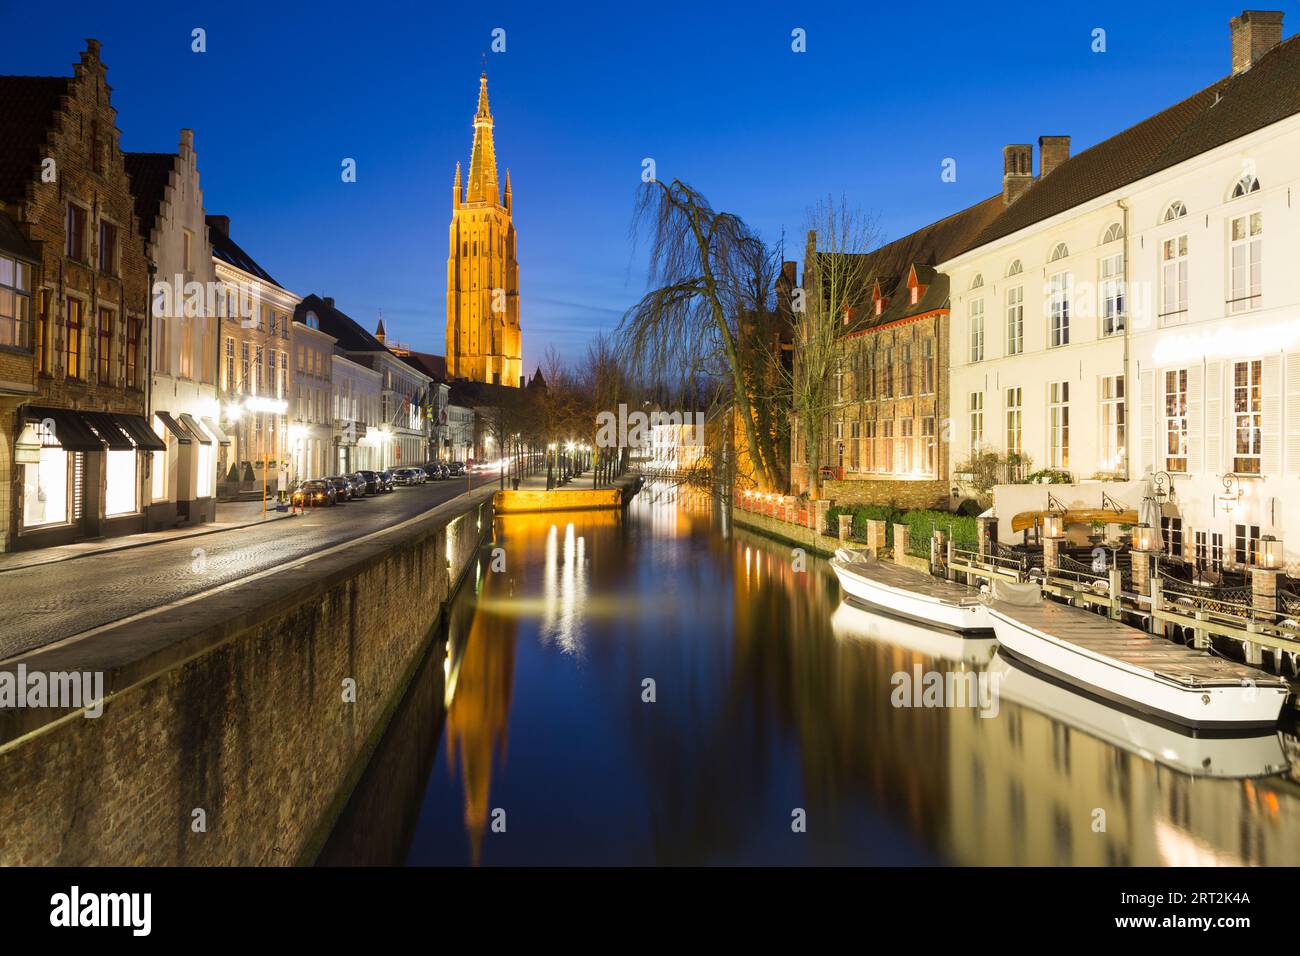 A view along the Dijver canal and street in Bruges during the day in the winter. The Church of Our Lady Bruges can be seen in the distance. There is s Stock Photo